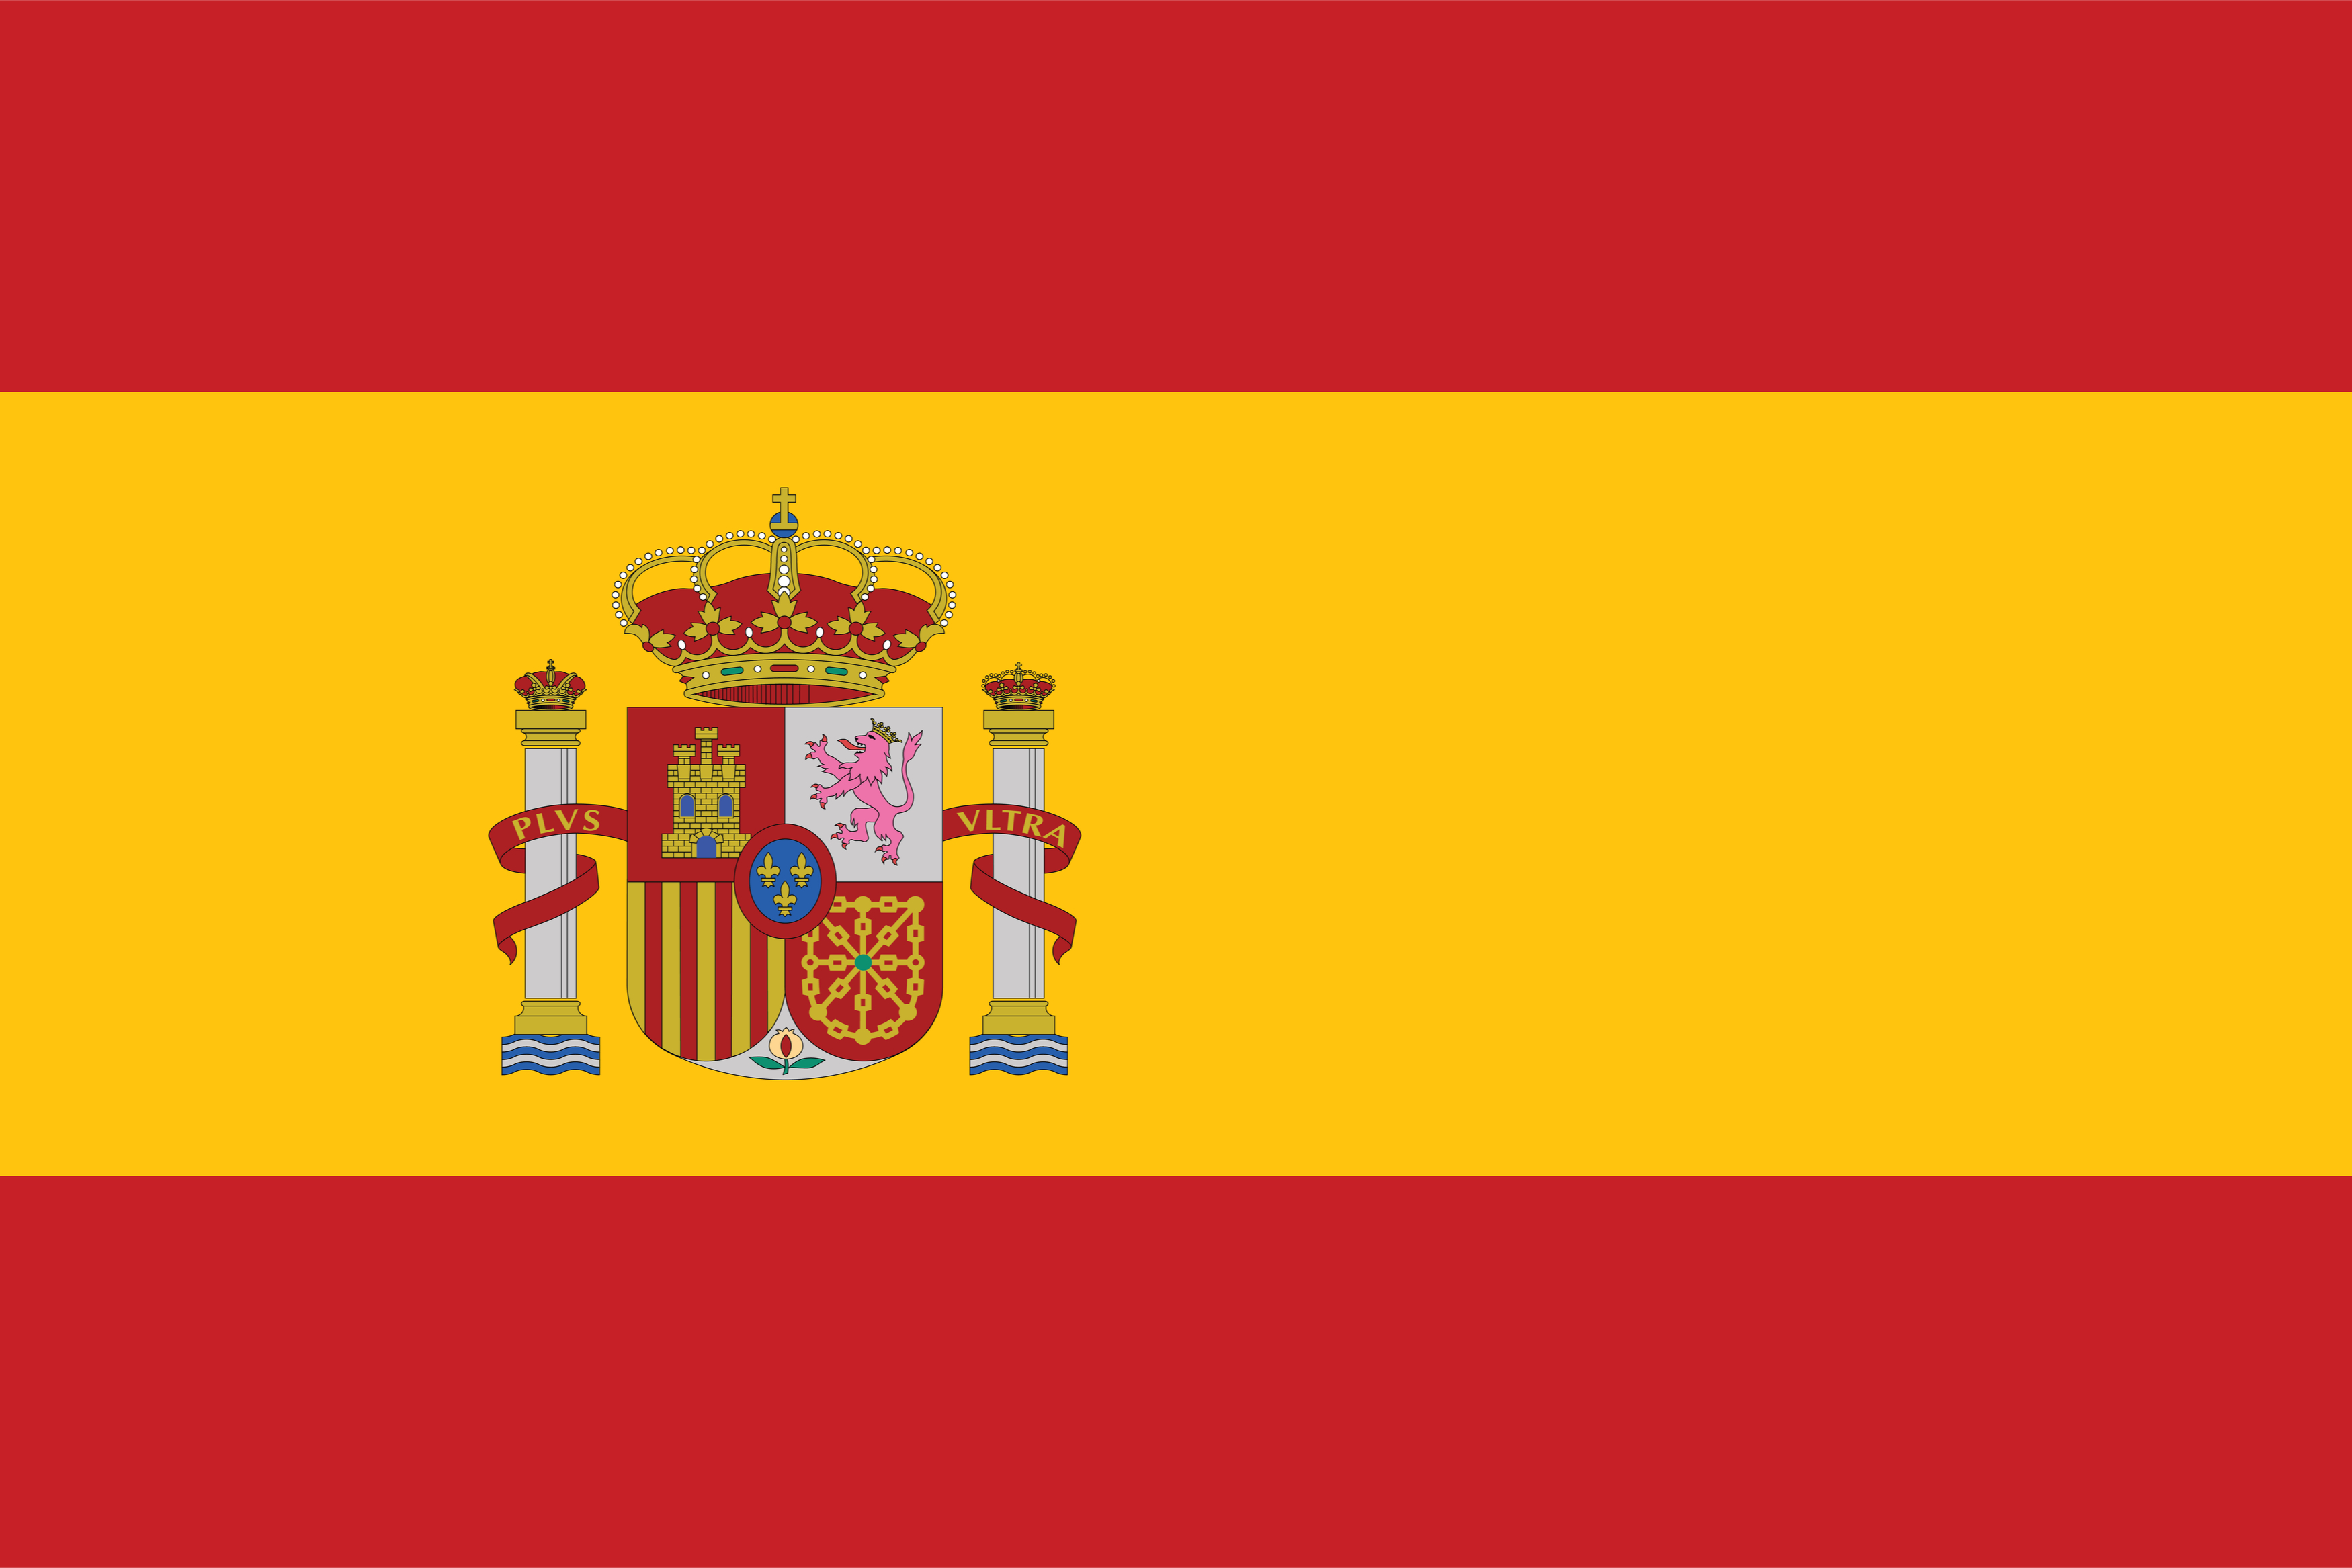 The National Flag of Spain has a horizontal rectangular design with a triband of two colors; red and yellow, with the Coat of Arms of Spain off-centered towards the flag’s hoist